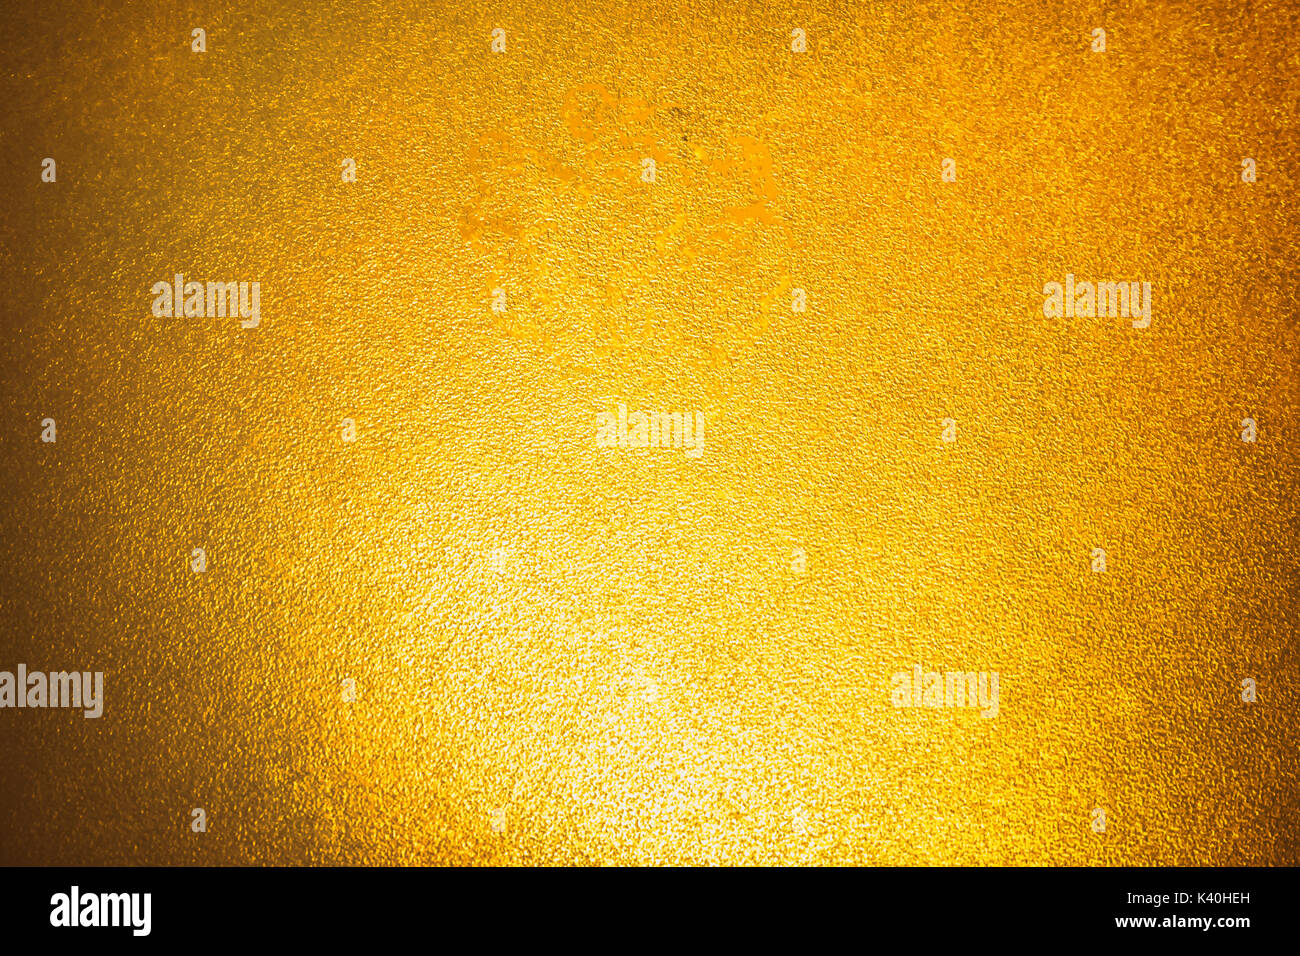 Simple gold gradient light abstract background for product or text backdrop design Stock Photo